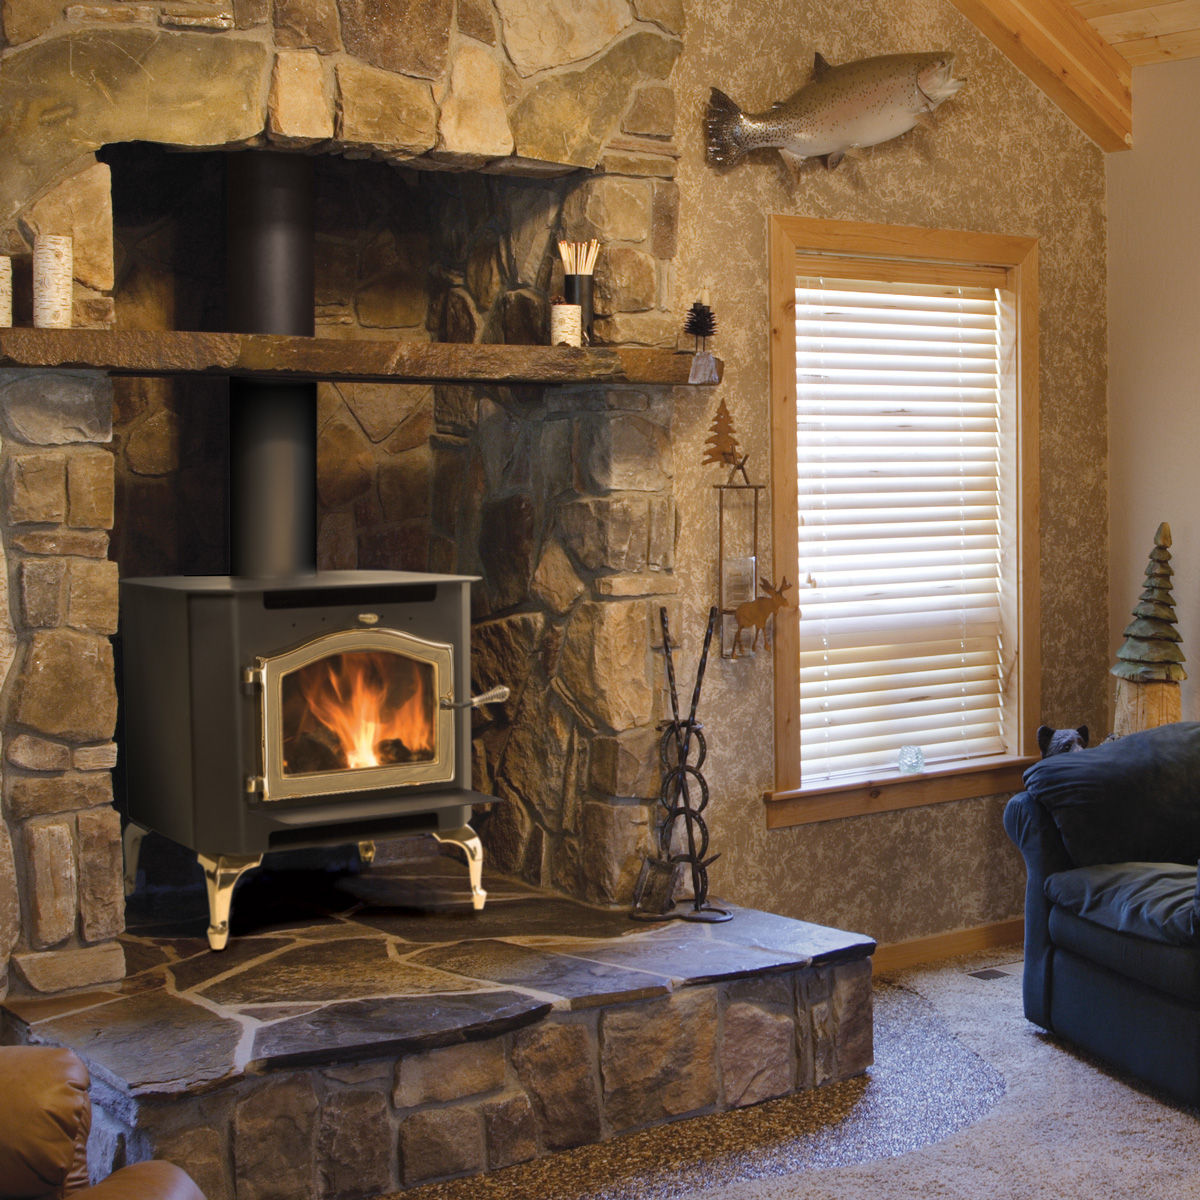 Wood Stove in Fireplace